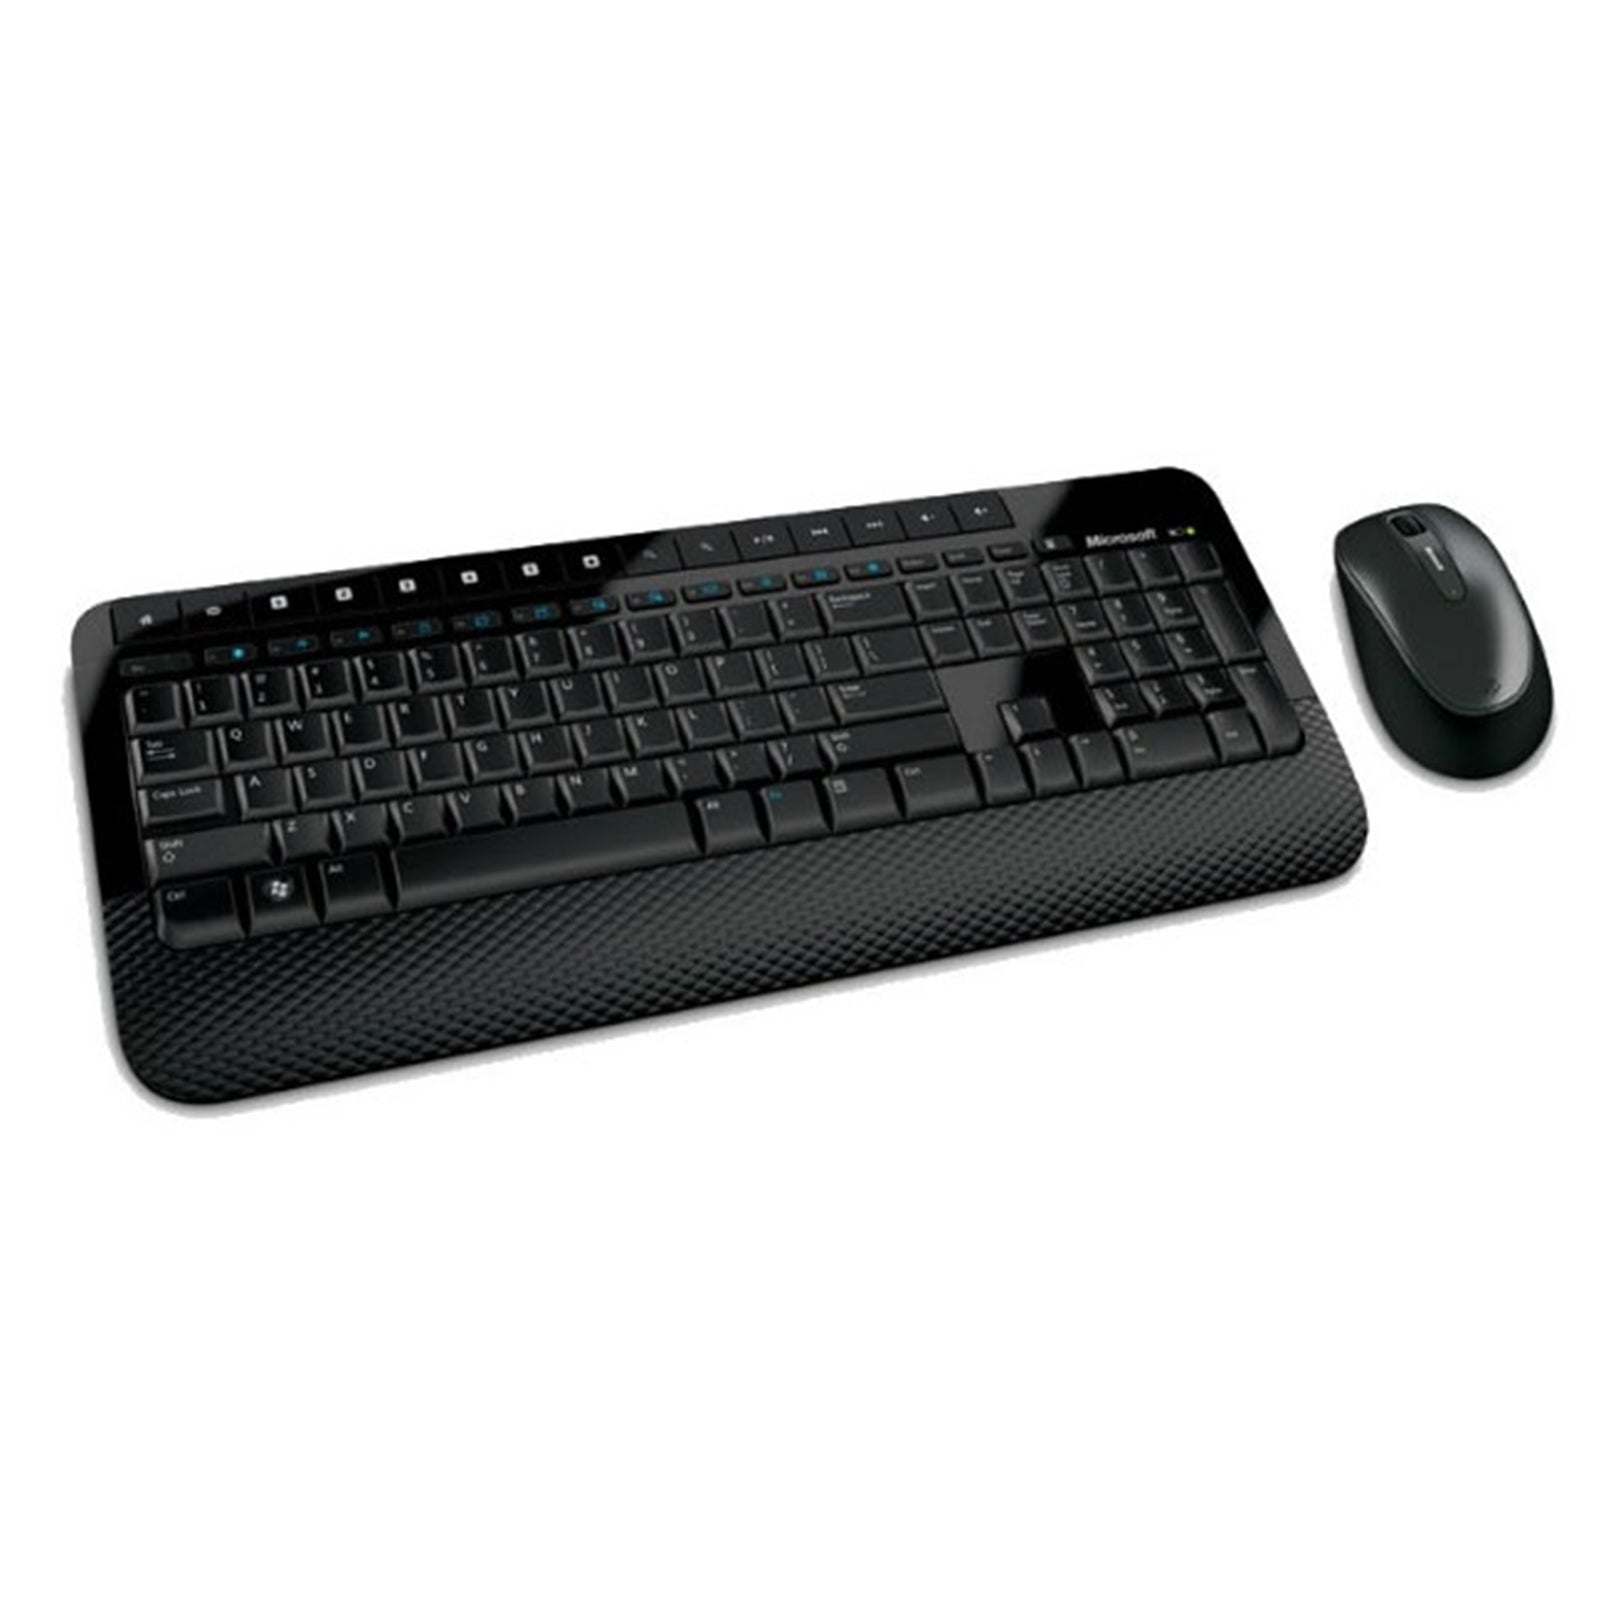 Microsoft Wireless Comfort Desktop 5050 with AES - Keyboard and Mouse  Combo: Multi-Media, Ergonomic, Microsoft Wireless Mouse and Keyboard with